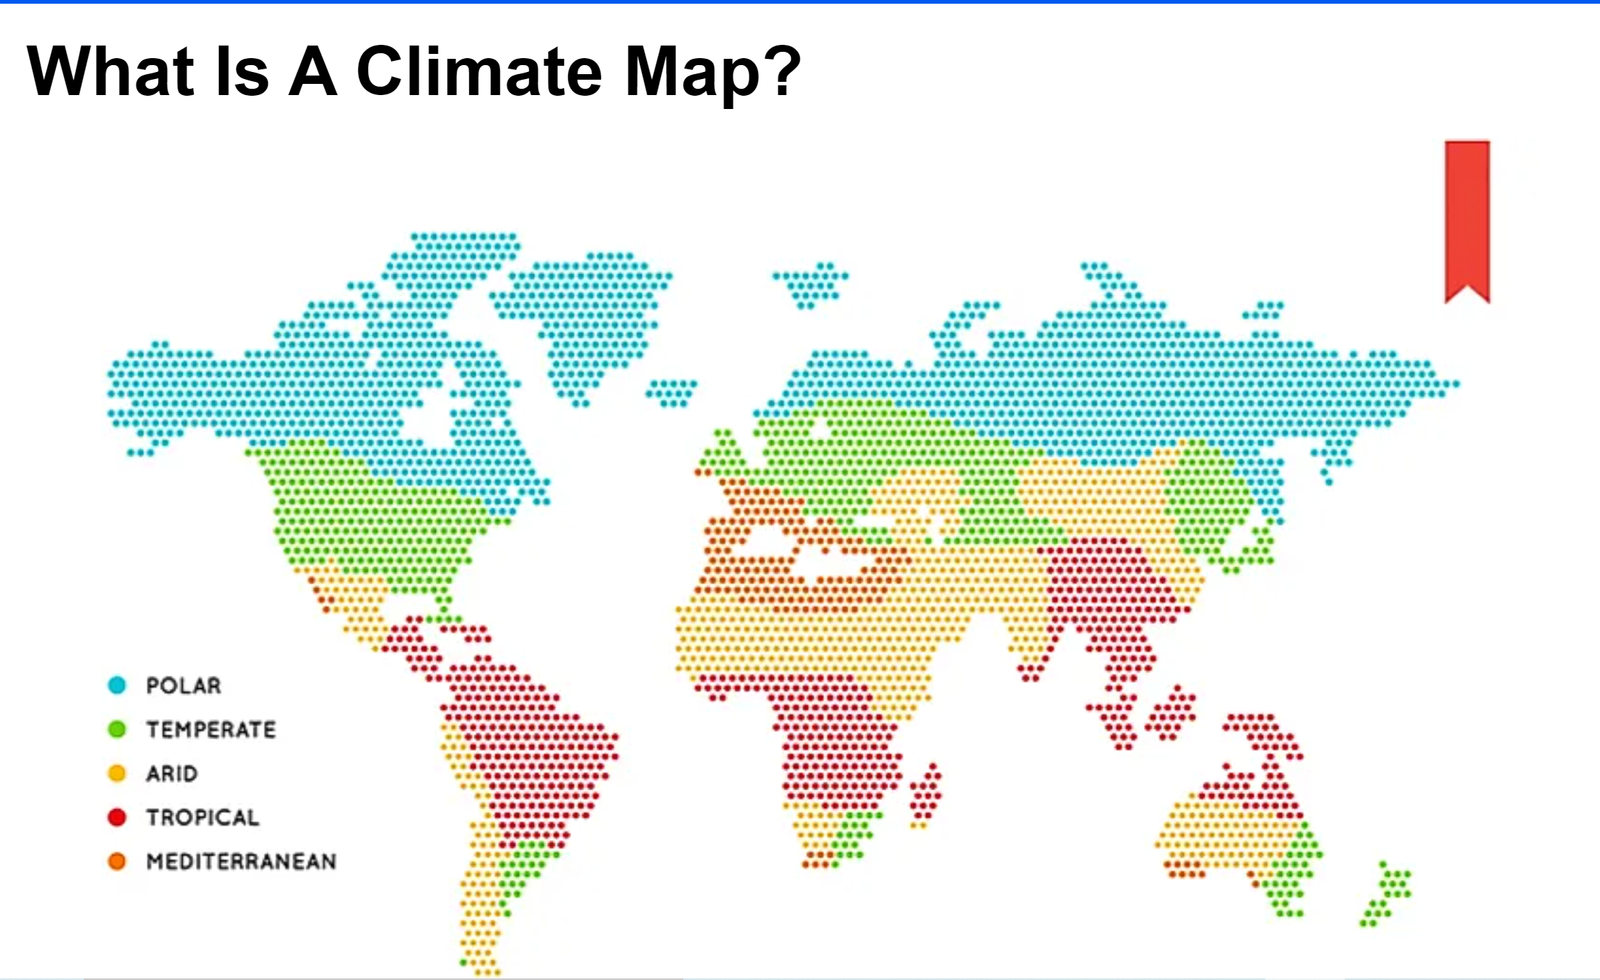 What Is a Climate Map?